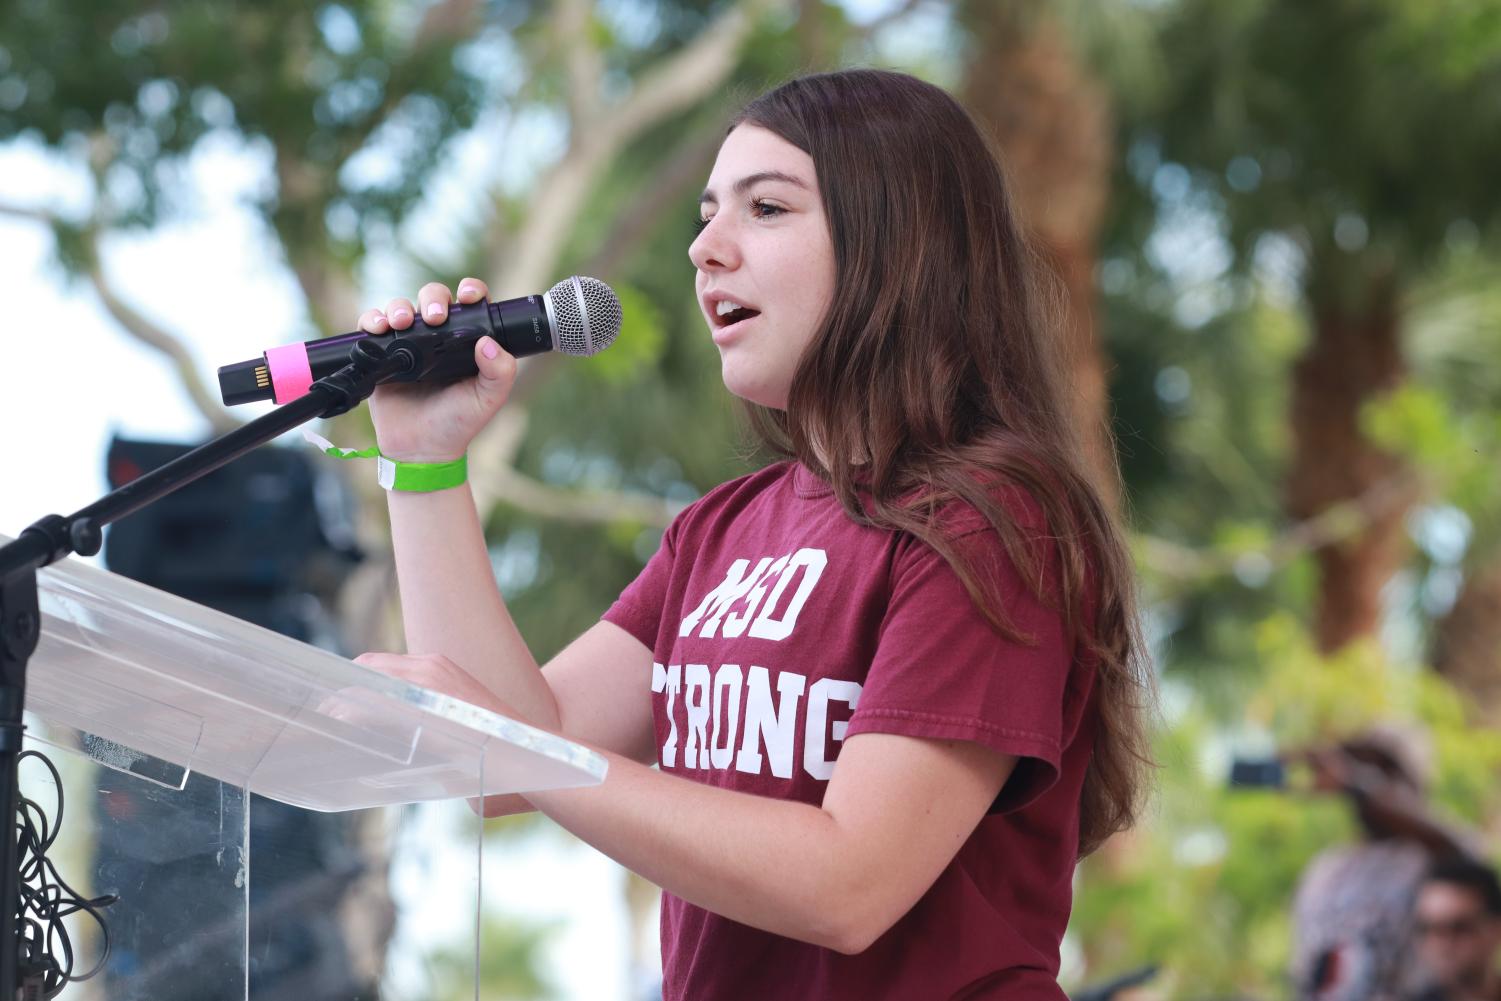 March for Our Lives speakers shame elected officials for ‘inaction’ regarding gun violence prevention